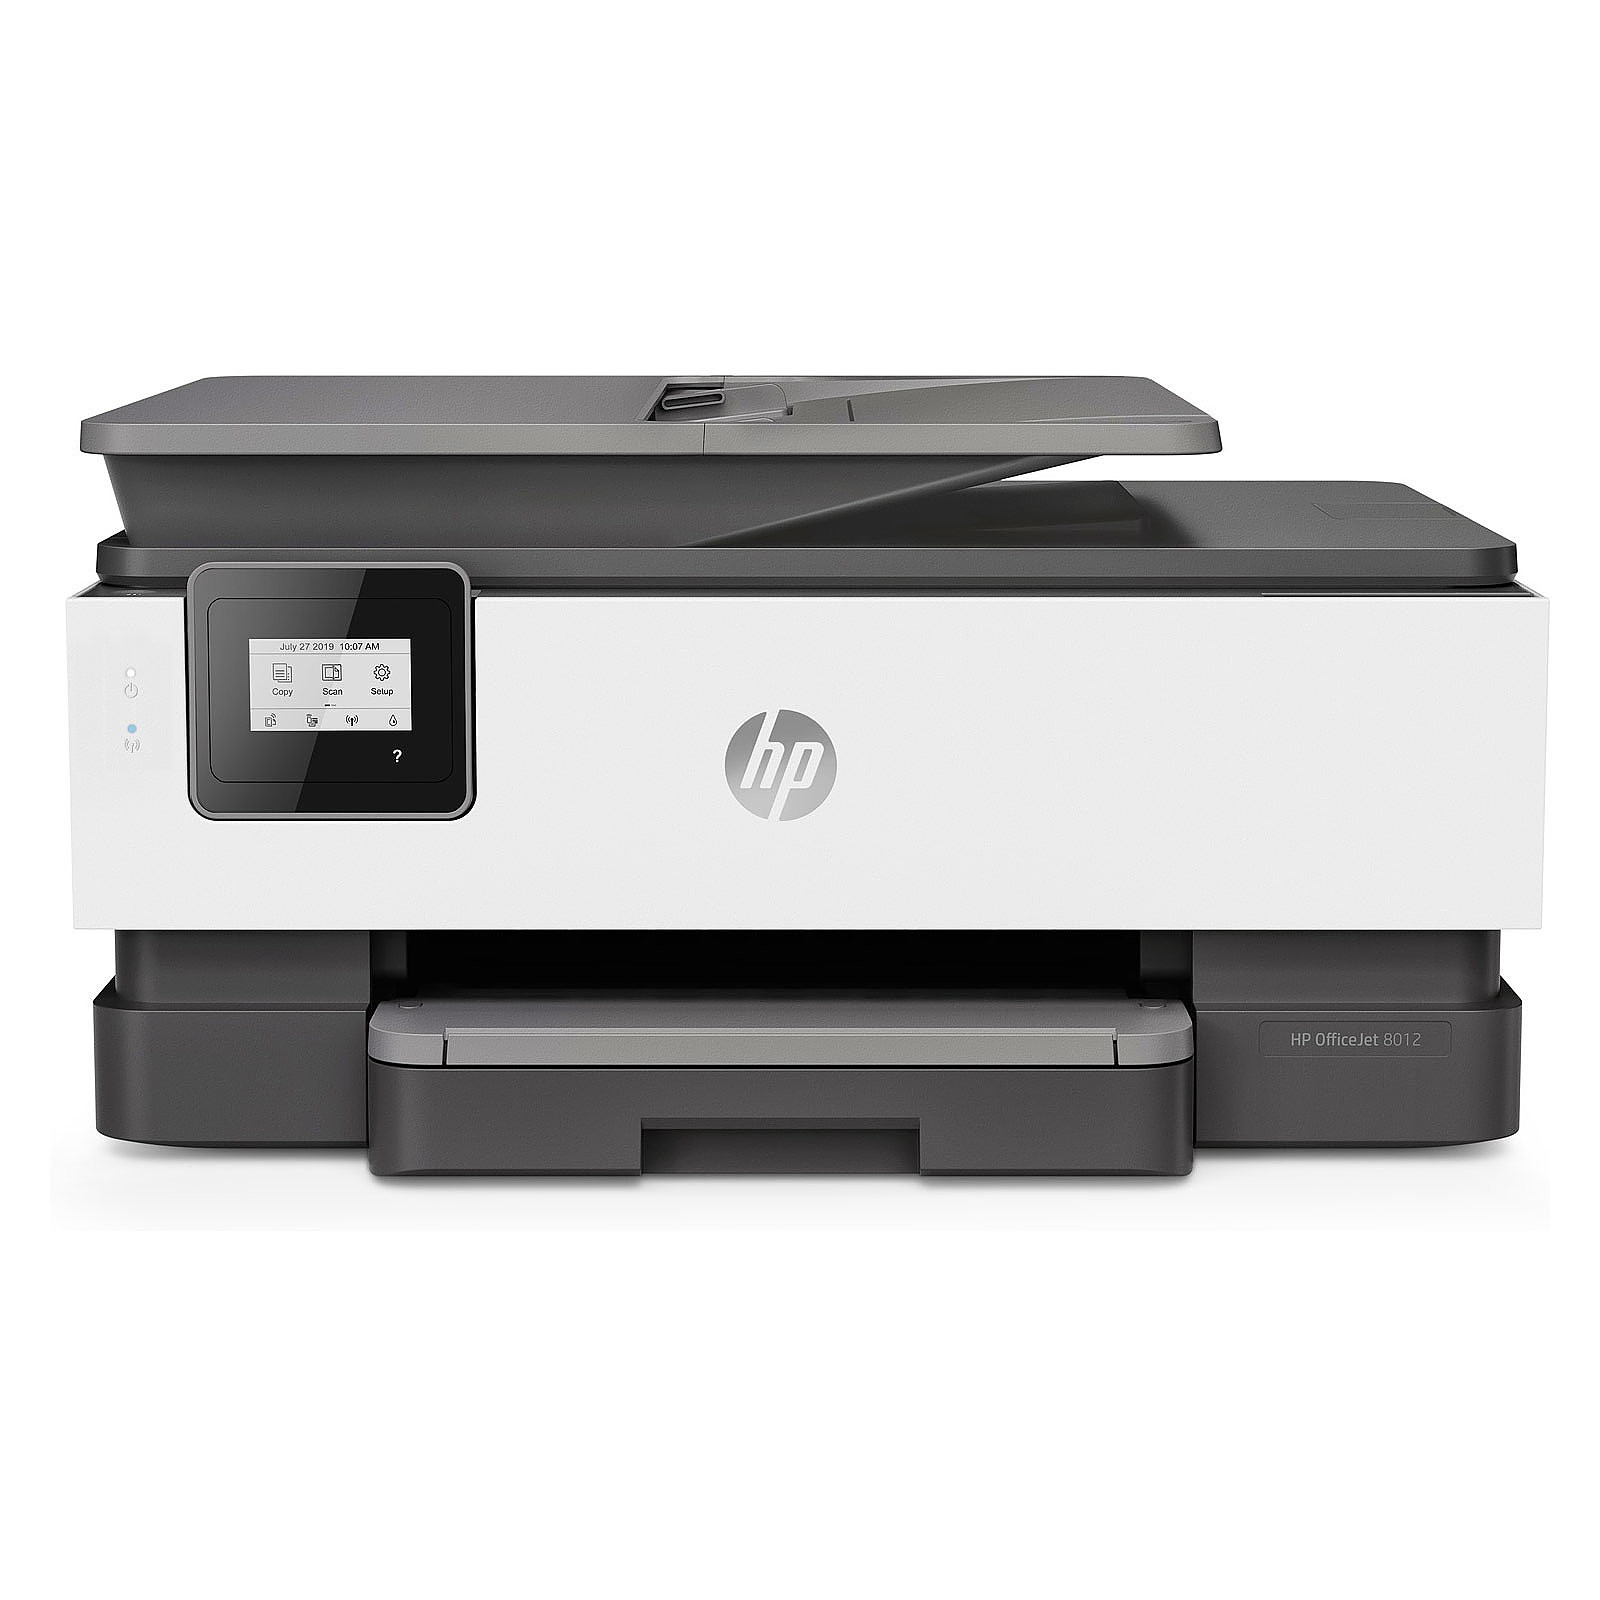 HP Officejet 8012e All-in-One - imprimante multifonctions - Couleur